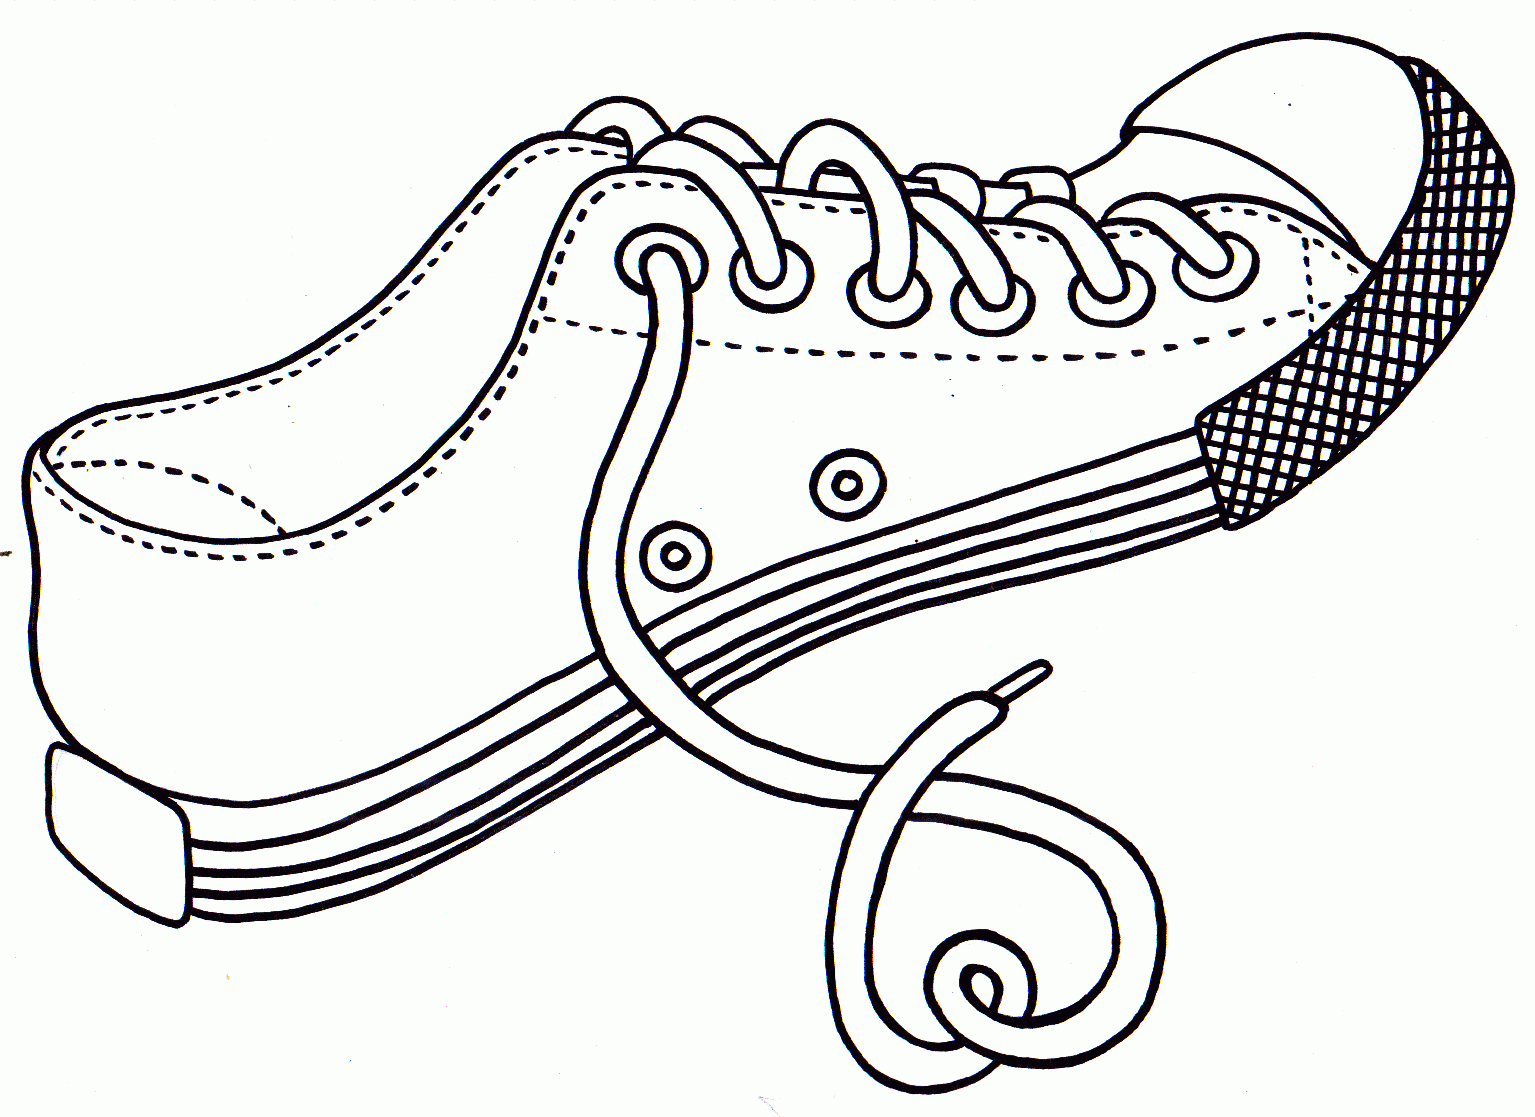 Shoe Coloring Template - Coloring Pages for Kids and for Adults